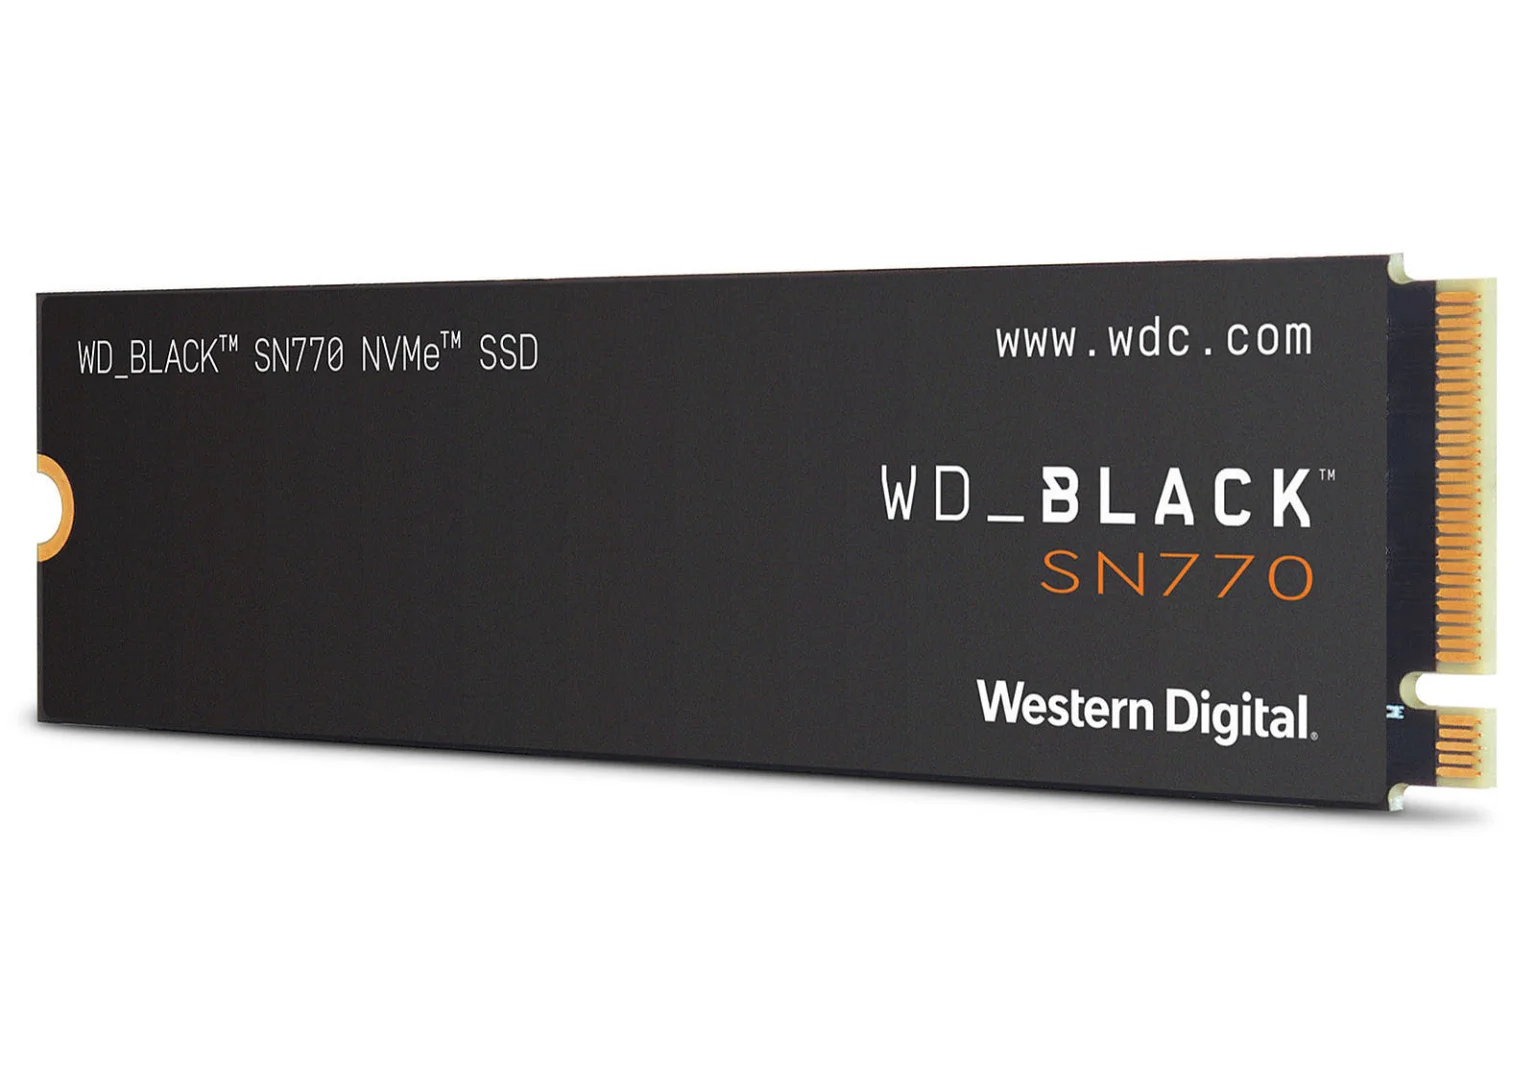 Western Digital Introduces New SSD Drive with Read Speeds Up to 5150MB/s